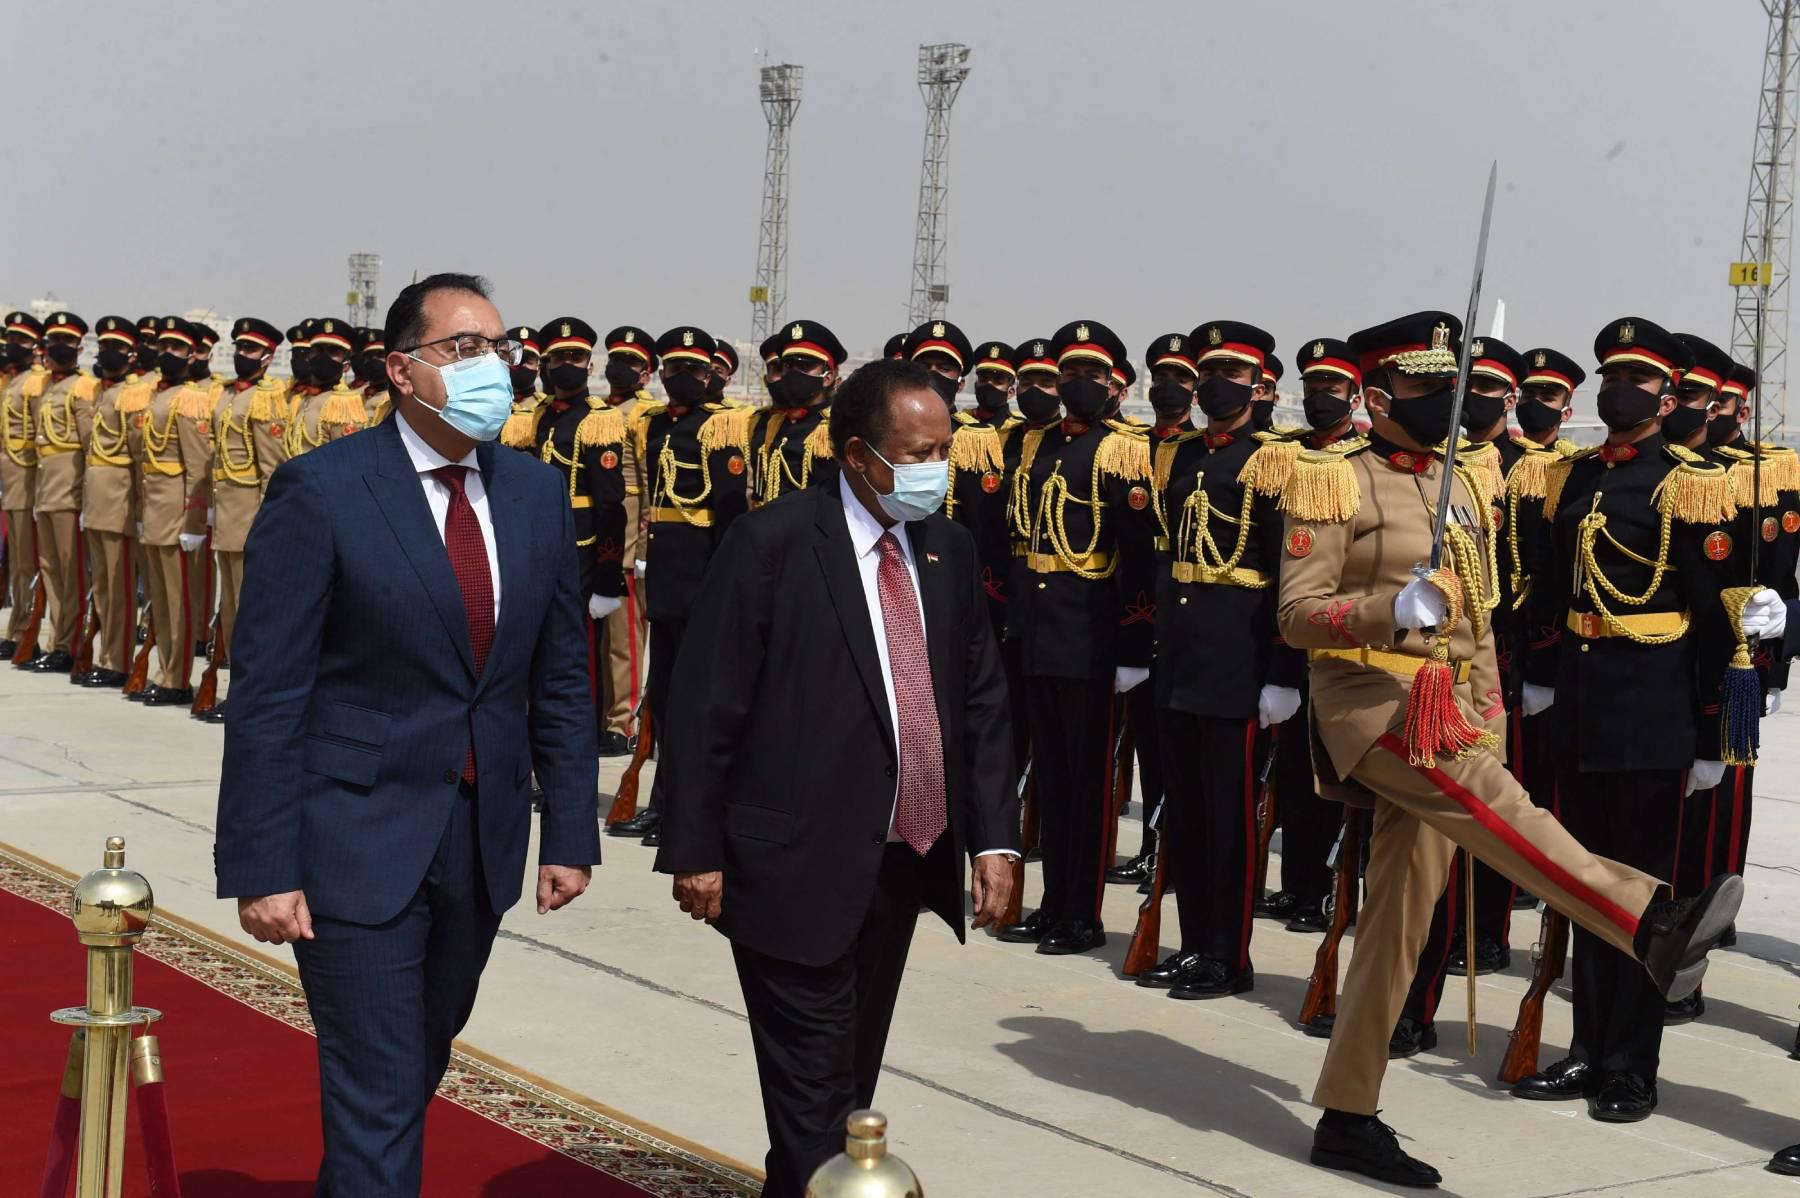 Ethiopia's dam is an existential threat to Egypt and Sudan